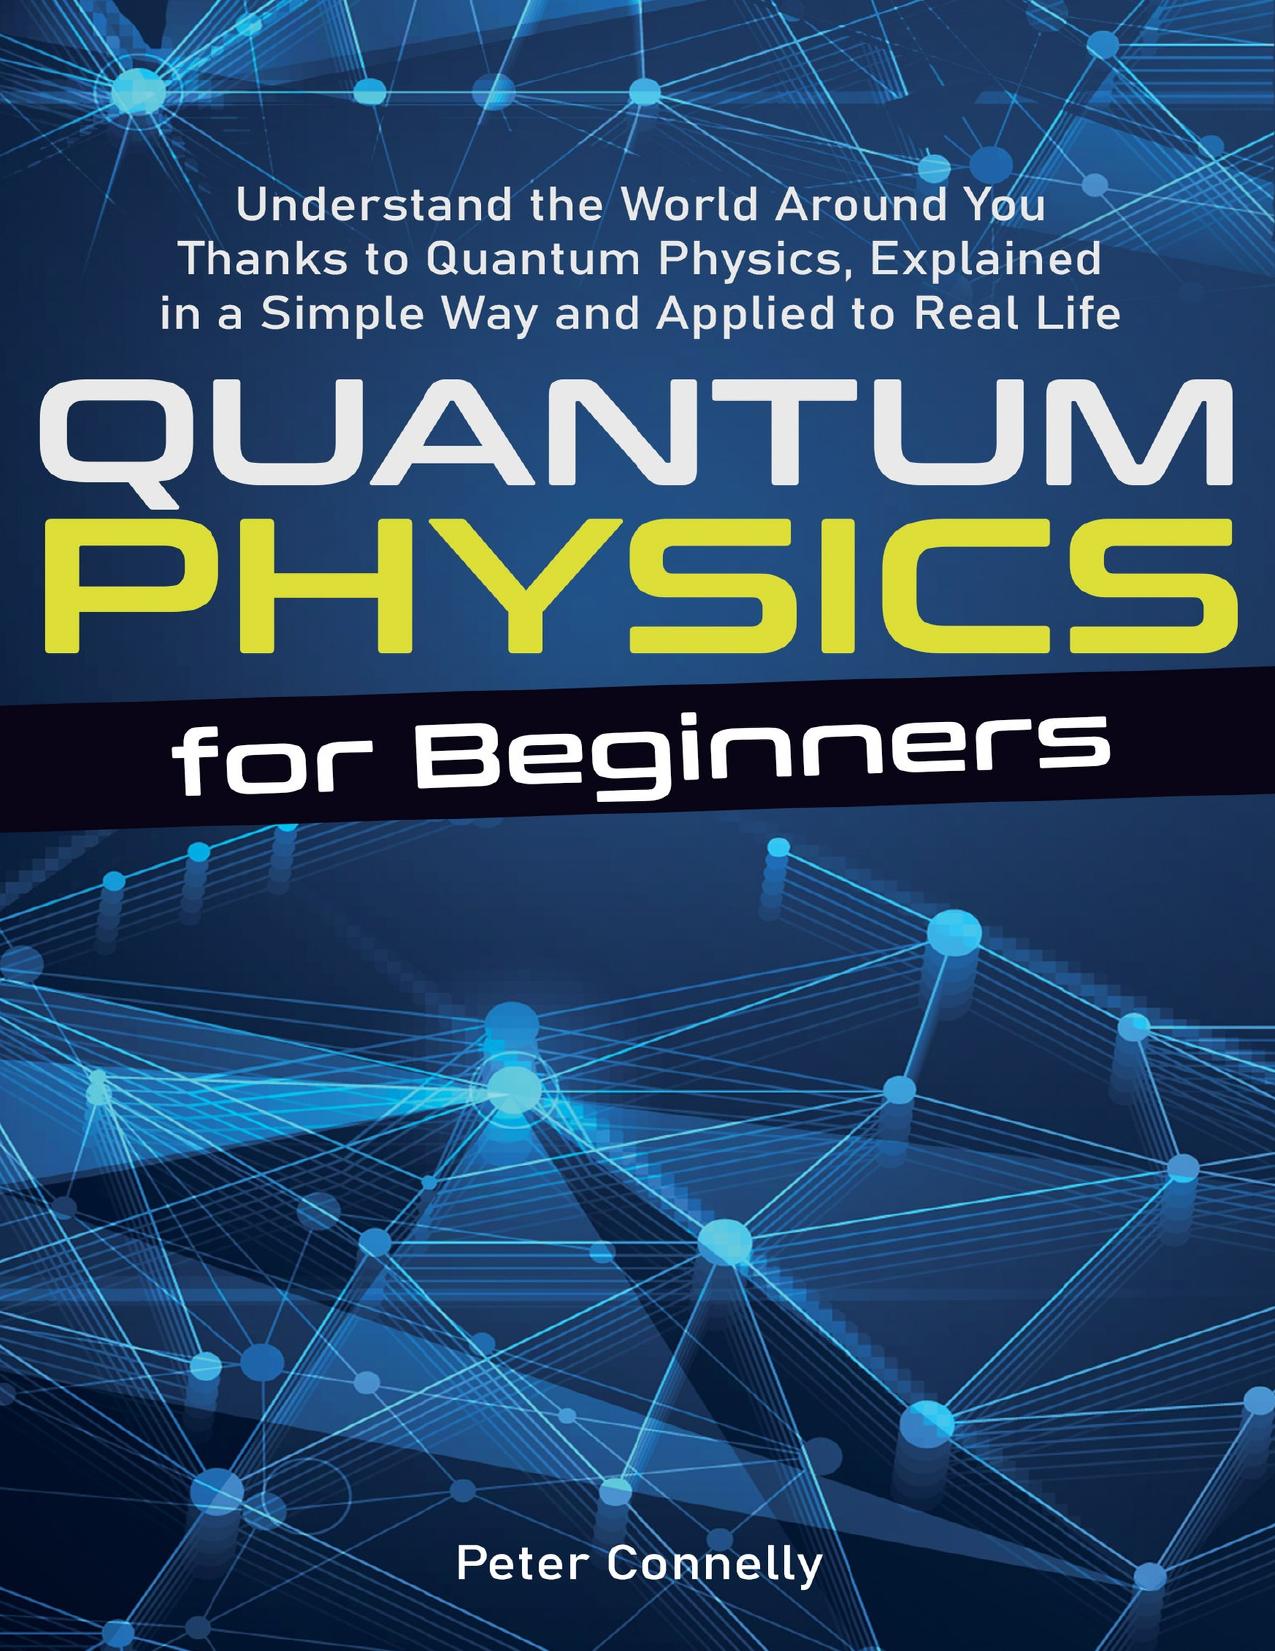 Quantum Physics for Beginners: Understand the World Around You Thanks to Quantum Physics, Explained in a Simple Way and Applied to Real Life by Connelly Peter